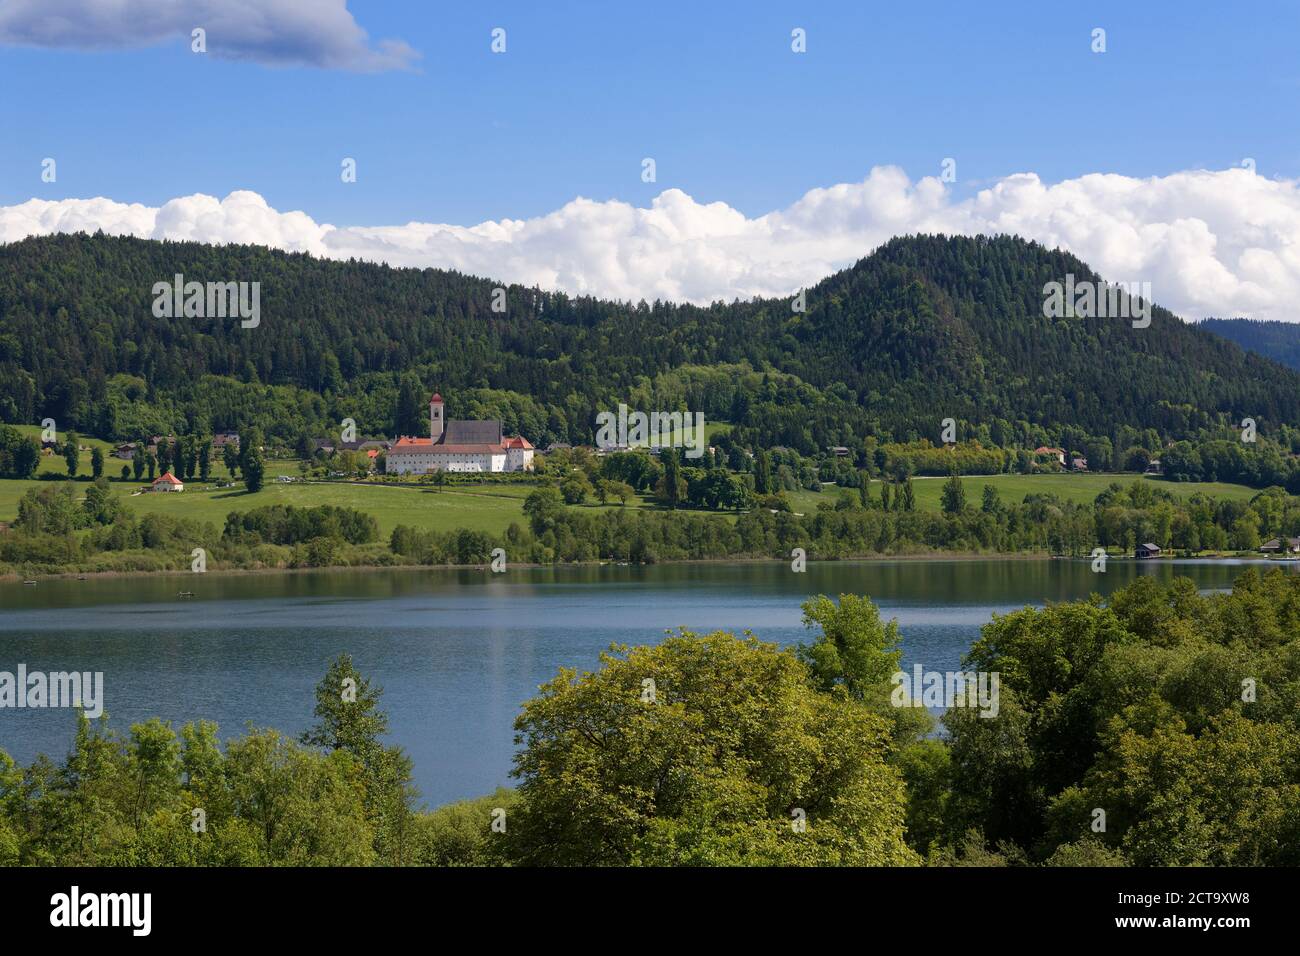 Austria, Carinthia, View of St Georgen abbey and Sankt Georgen am Langsee at Langsee Lake Stock Photo